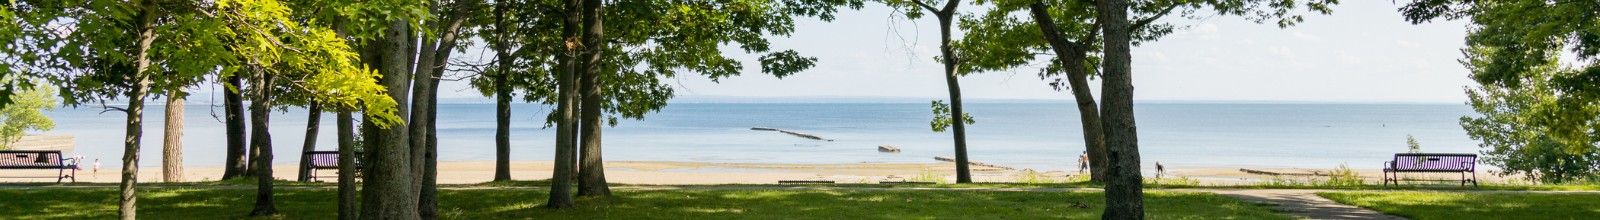 A shore line with trees and a walking path in the summer